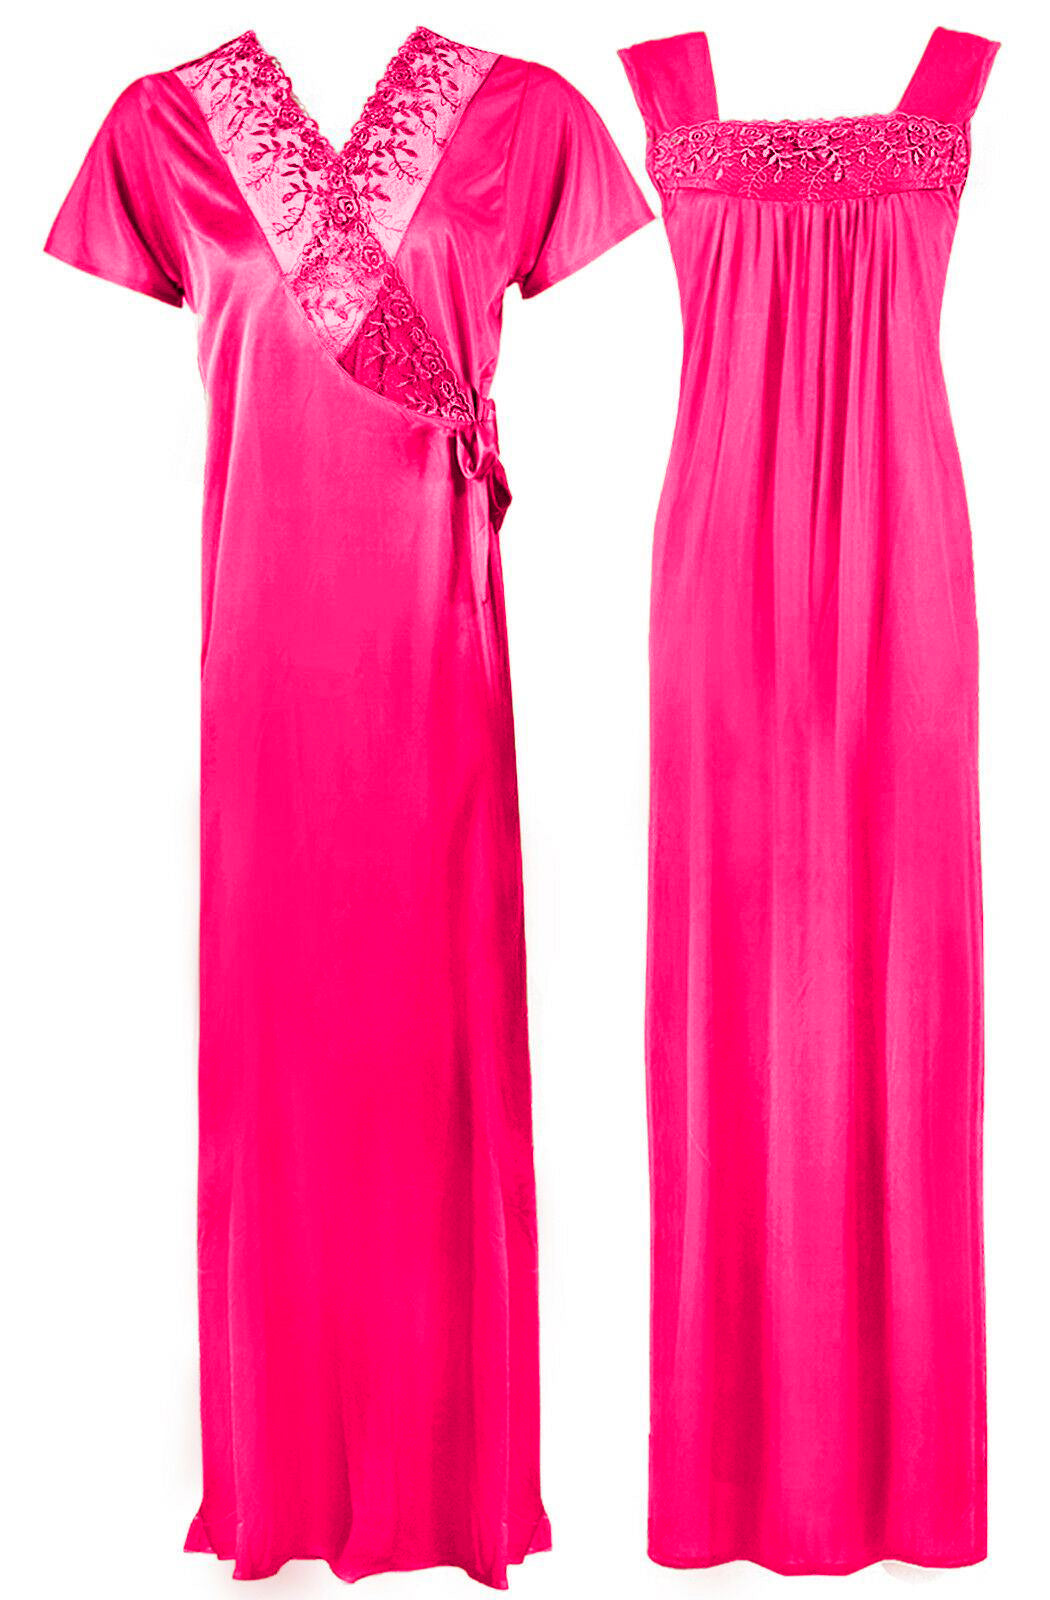 Rose Pink / One Size WOMENS LONG SATIN CHEMISE NIGHTIE NIGHTDRESS LADIES DRESSING GOWN 2PC SET 8-16 The Orange Tags